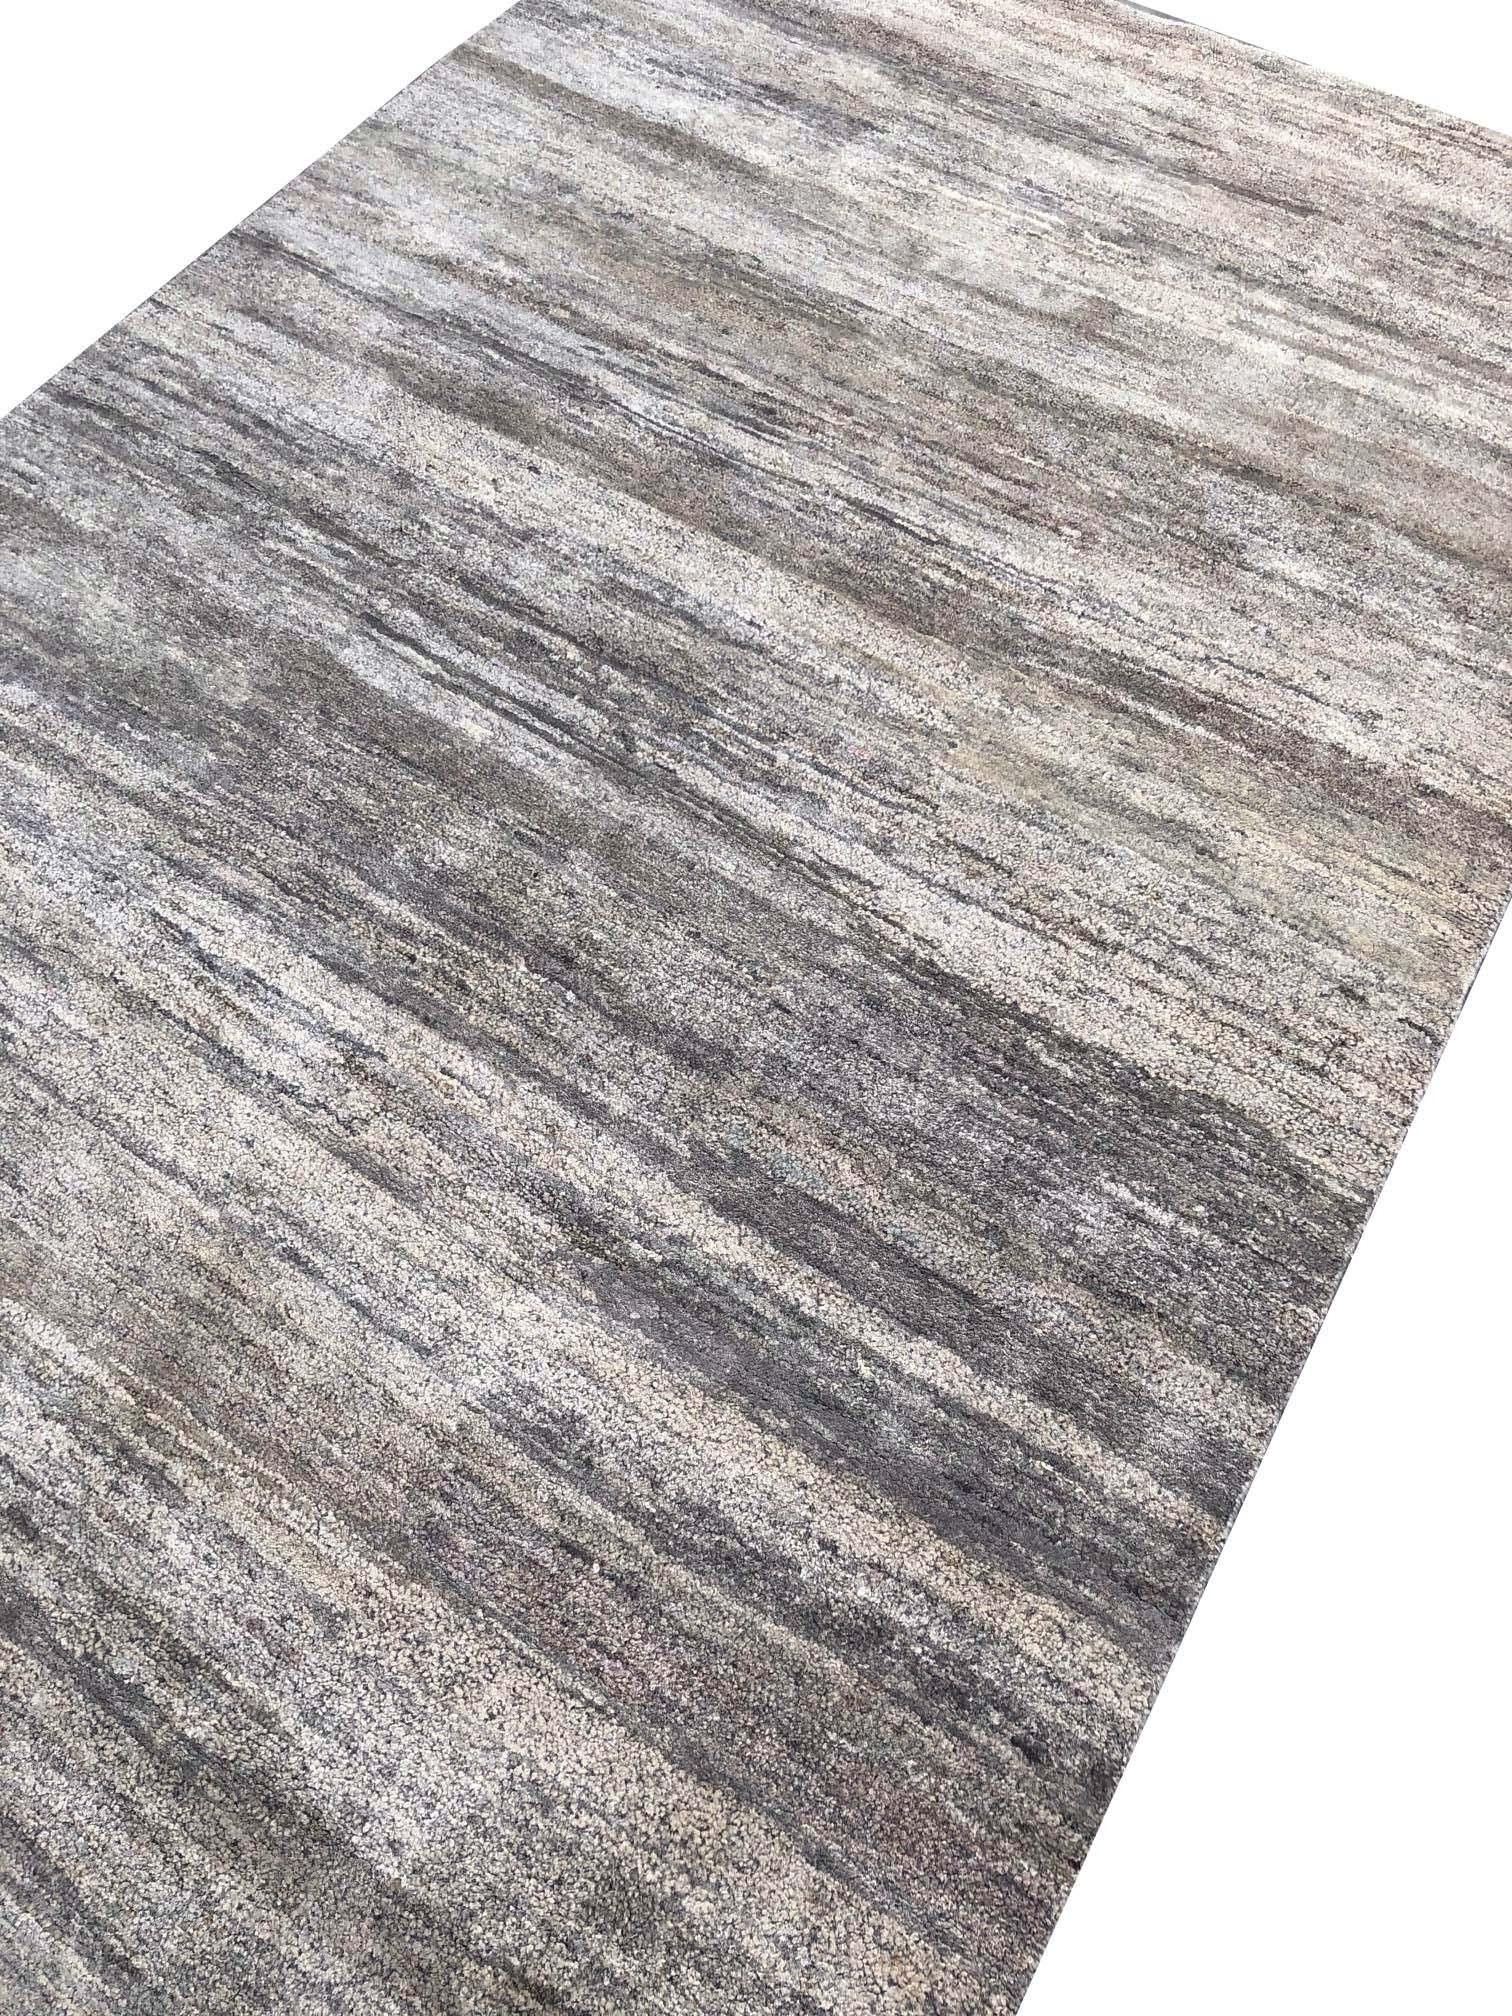 From Rug & Kilim’s texture of color collection, this 5’ x 8’ modern rug is handmade with a proprietary blend of quality silk in this innovation of plain rug styles and comfortable versatility. The natural sheen quality of the silk blend plays very